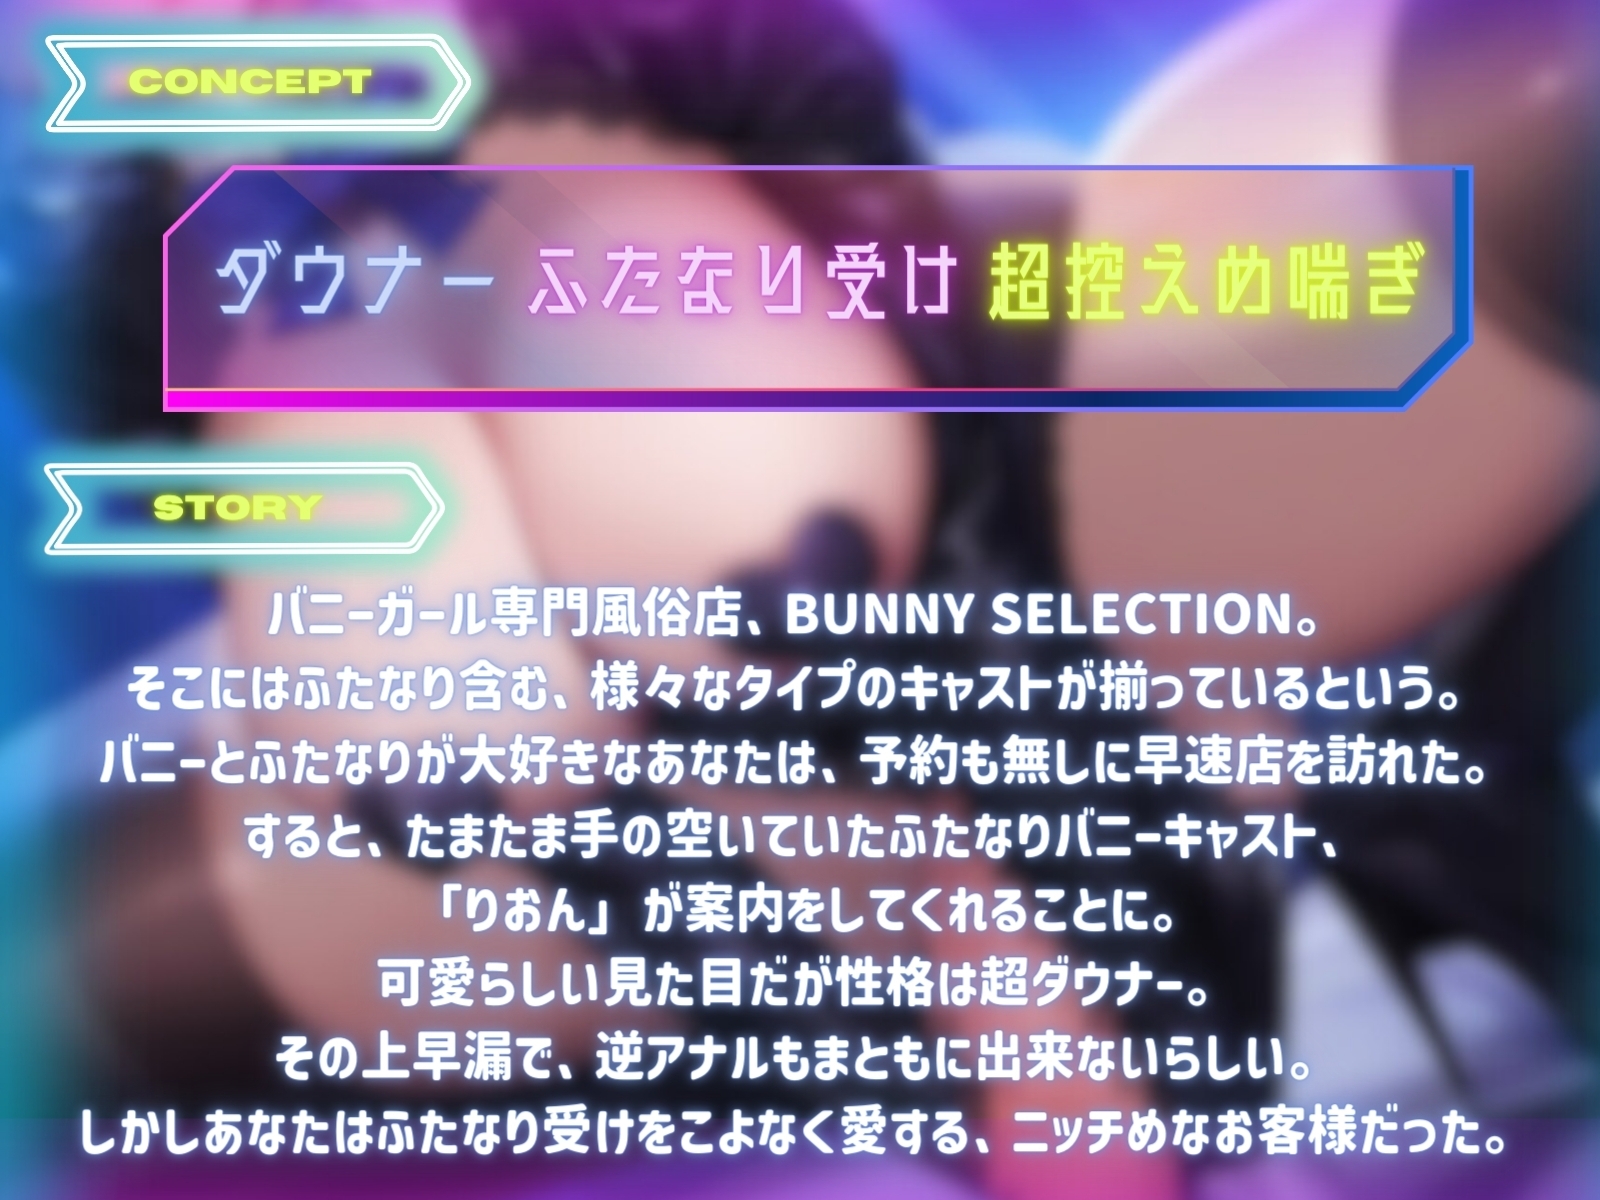 WELCOME TO BUNNY SELECTION